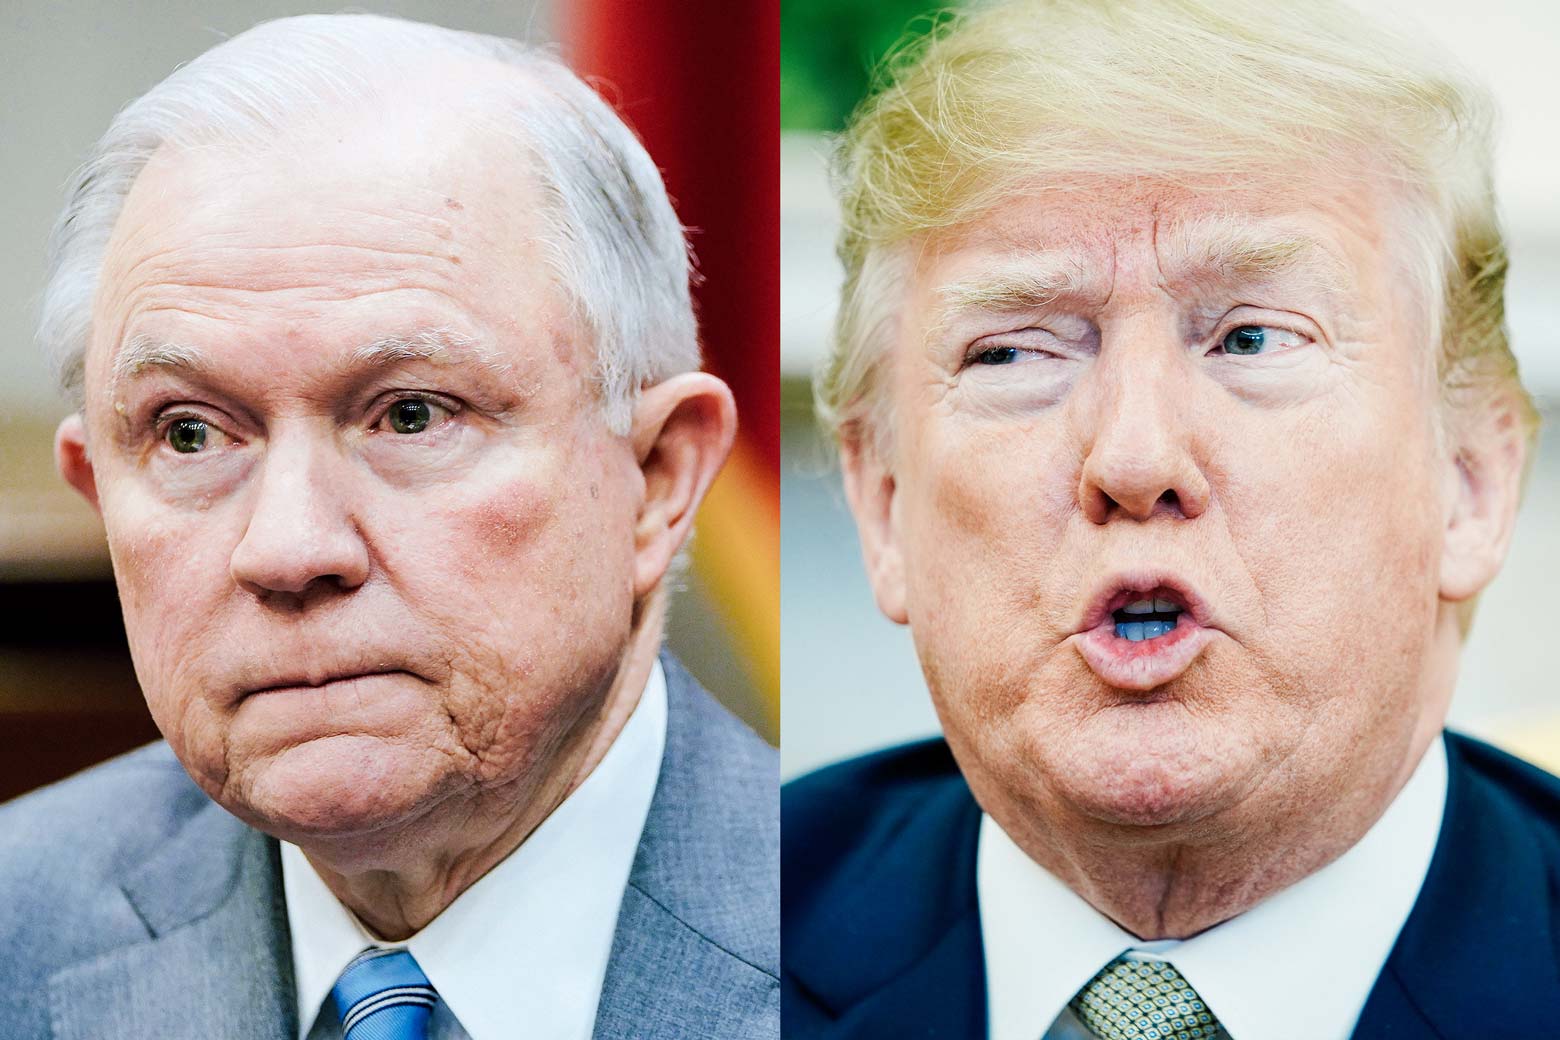 Photo illustration: side-by-side of Attorney General Jeff Sessions and President Donald Trump.